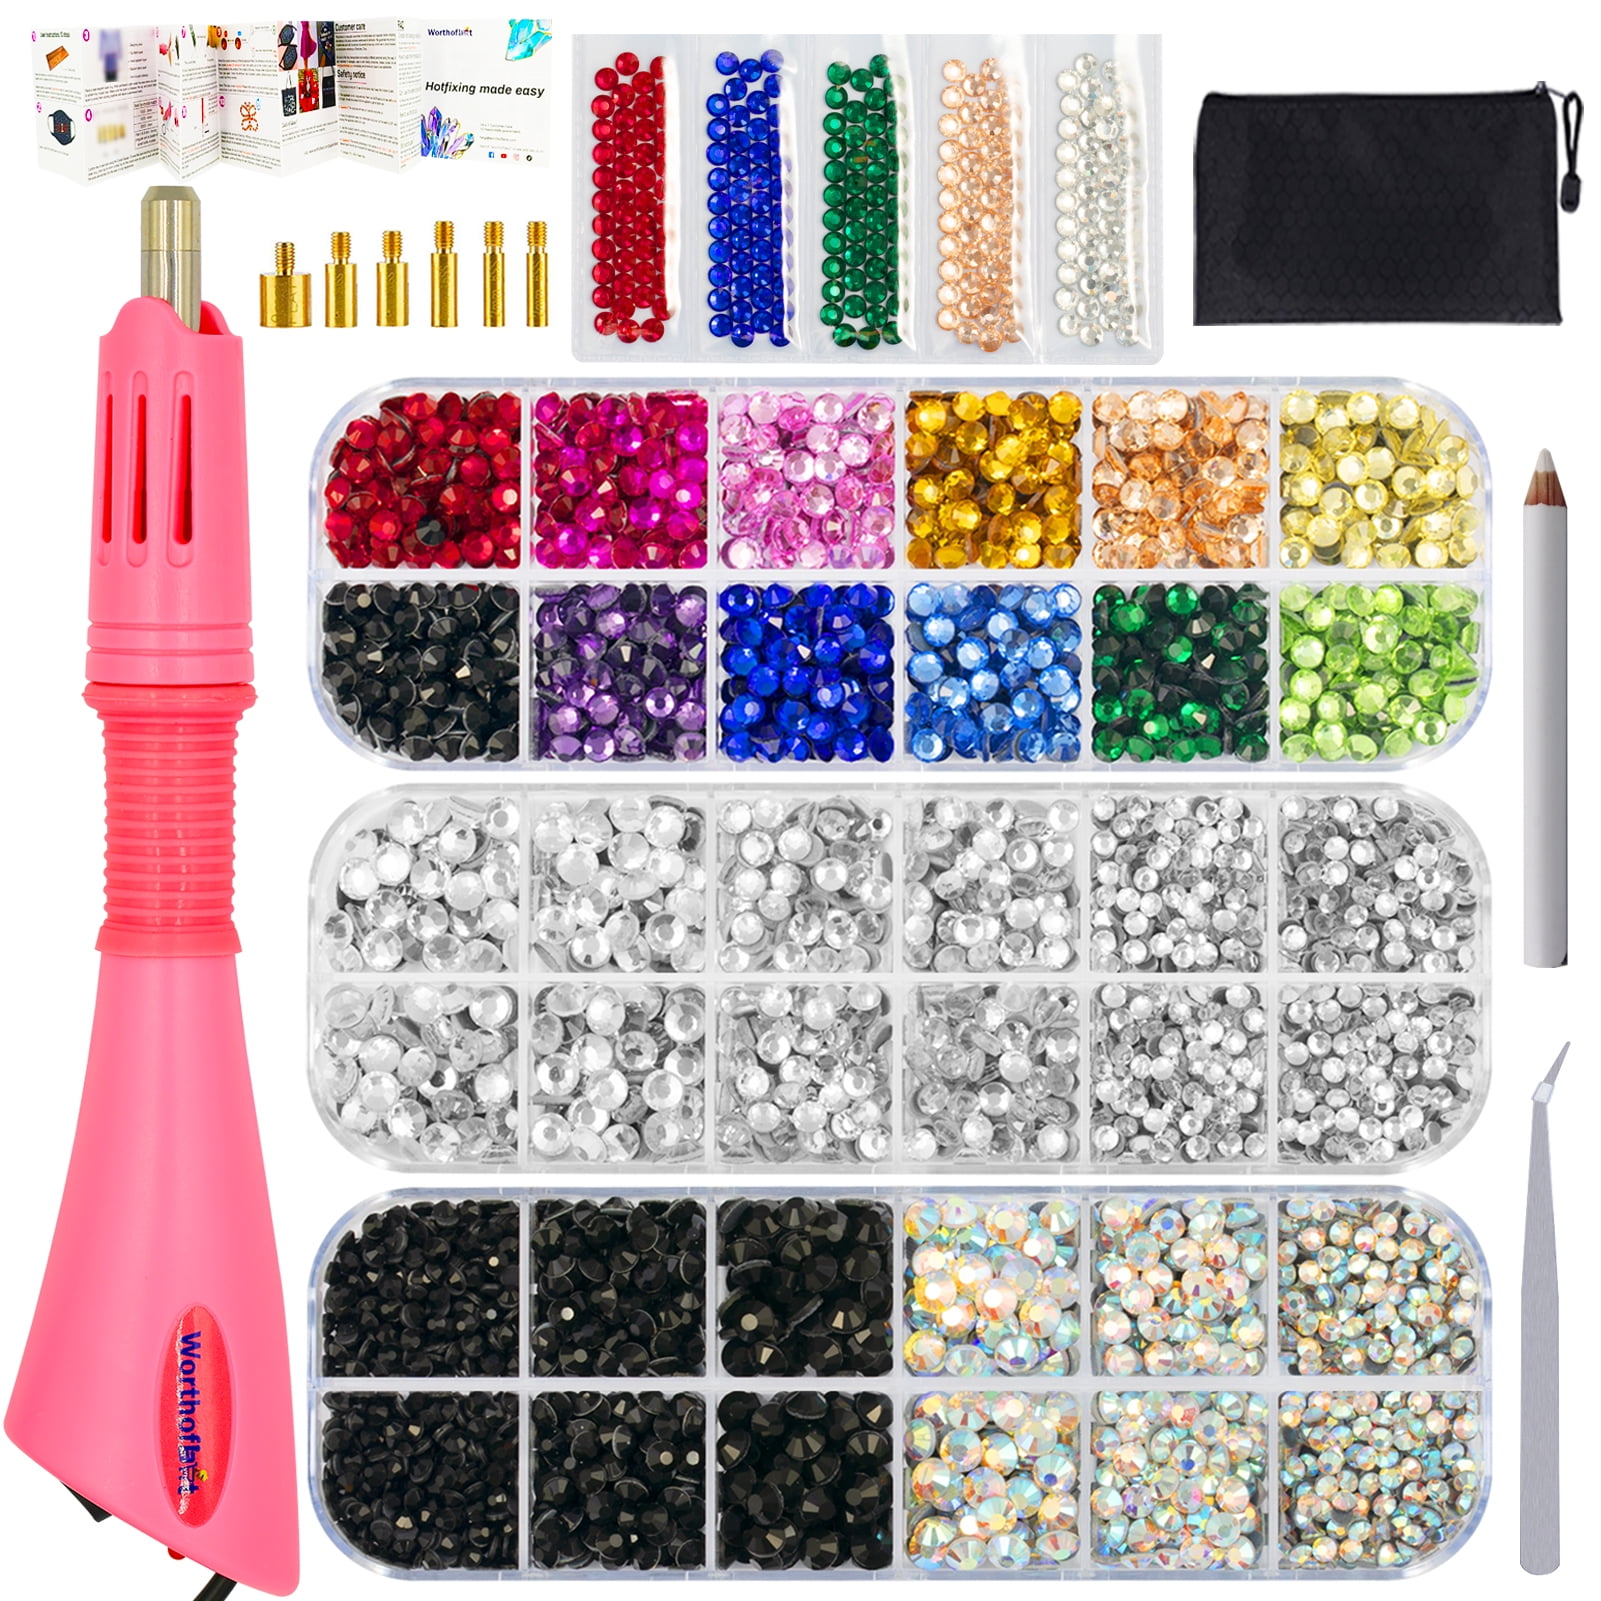 Worthofbest Bedazzler Kit with Rhinestones, Hotfix Rhinestone Applicator  for Fabric and Clothes, Age: 12 and Above